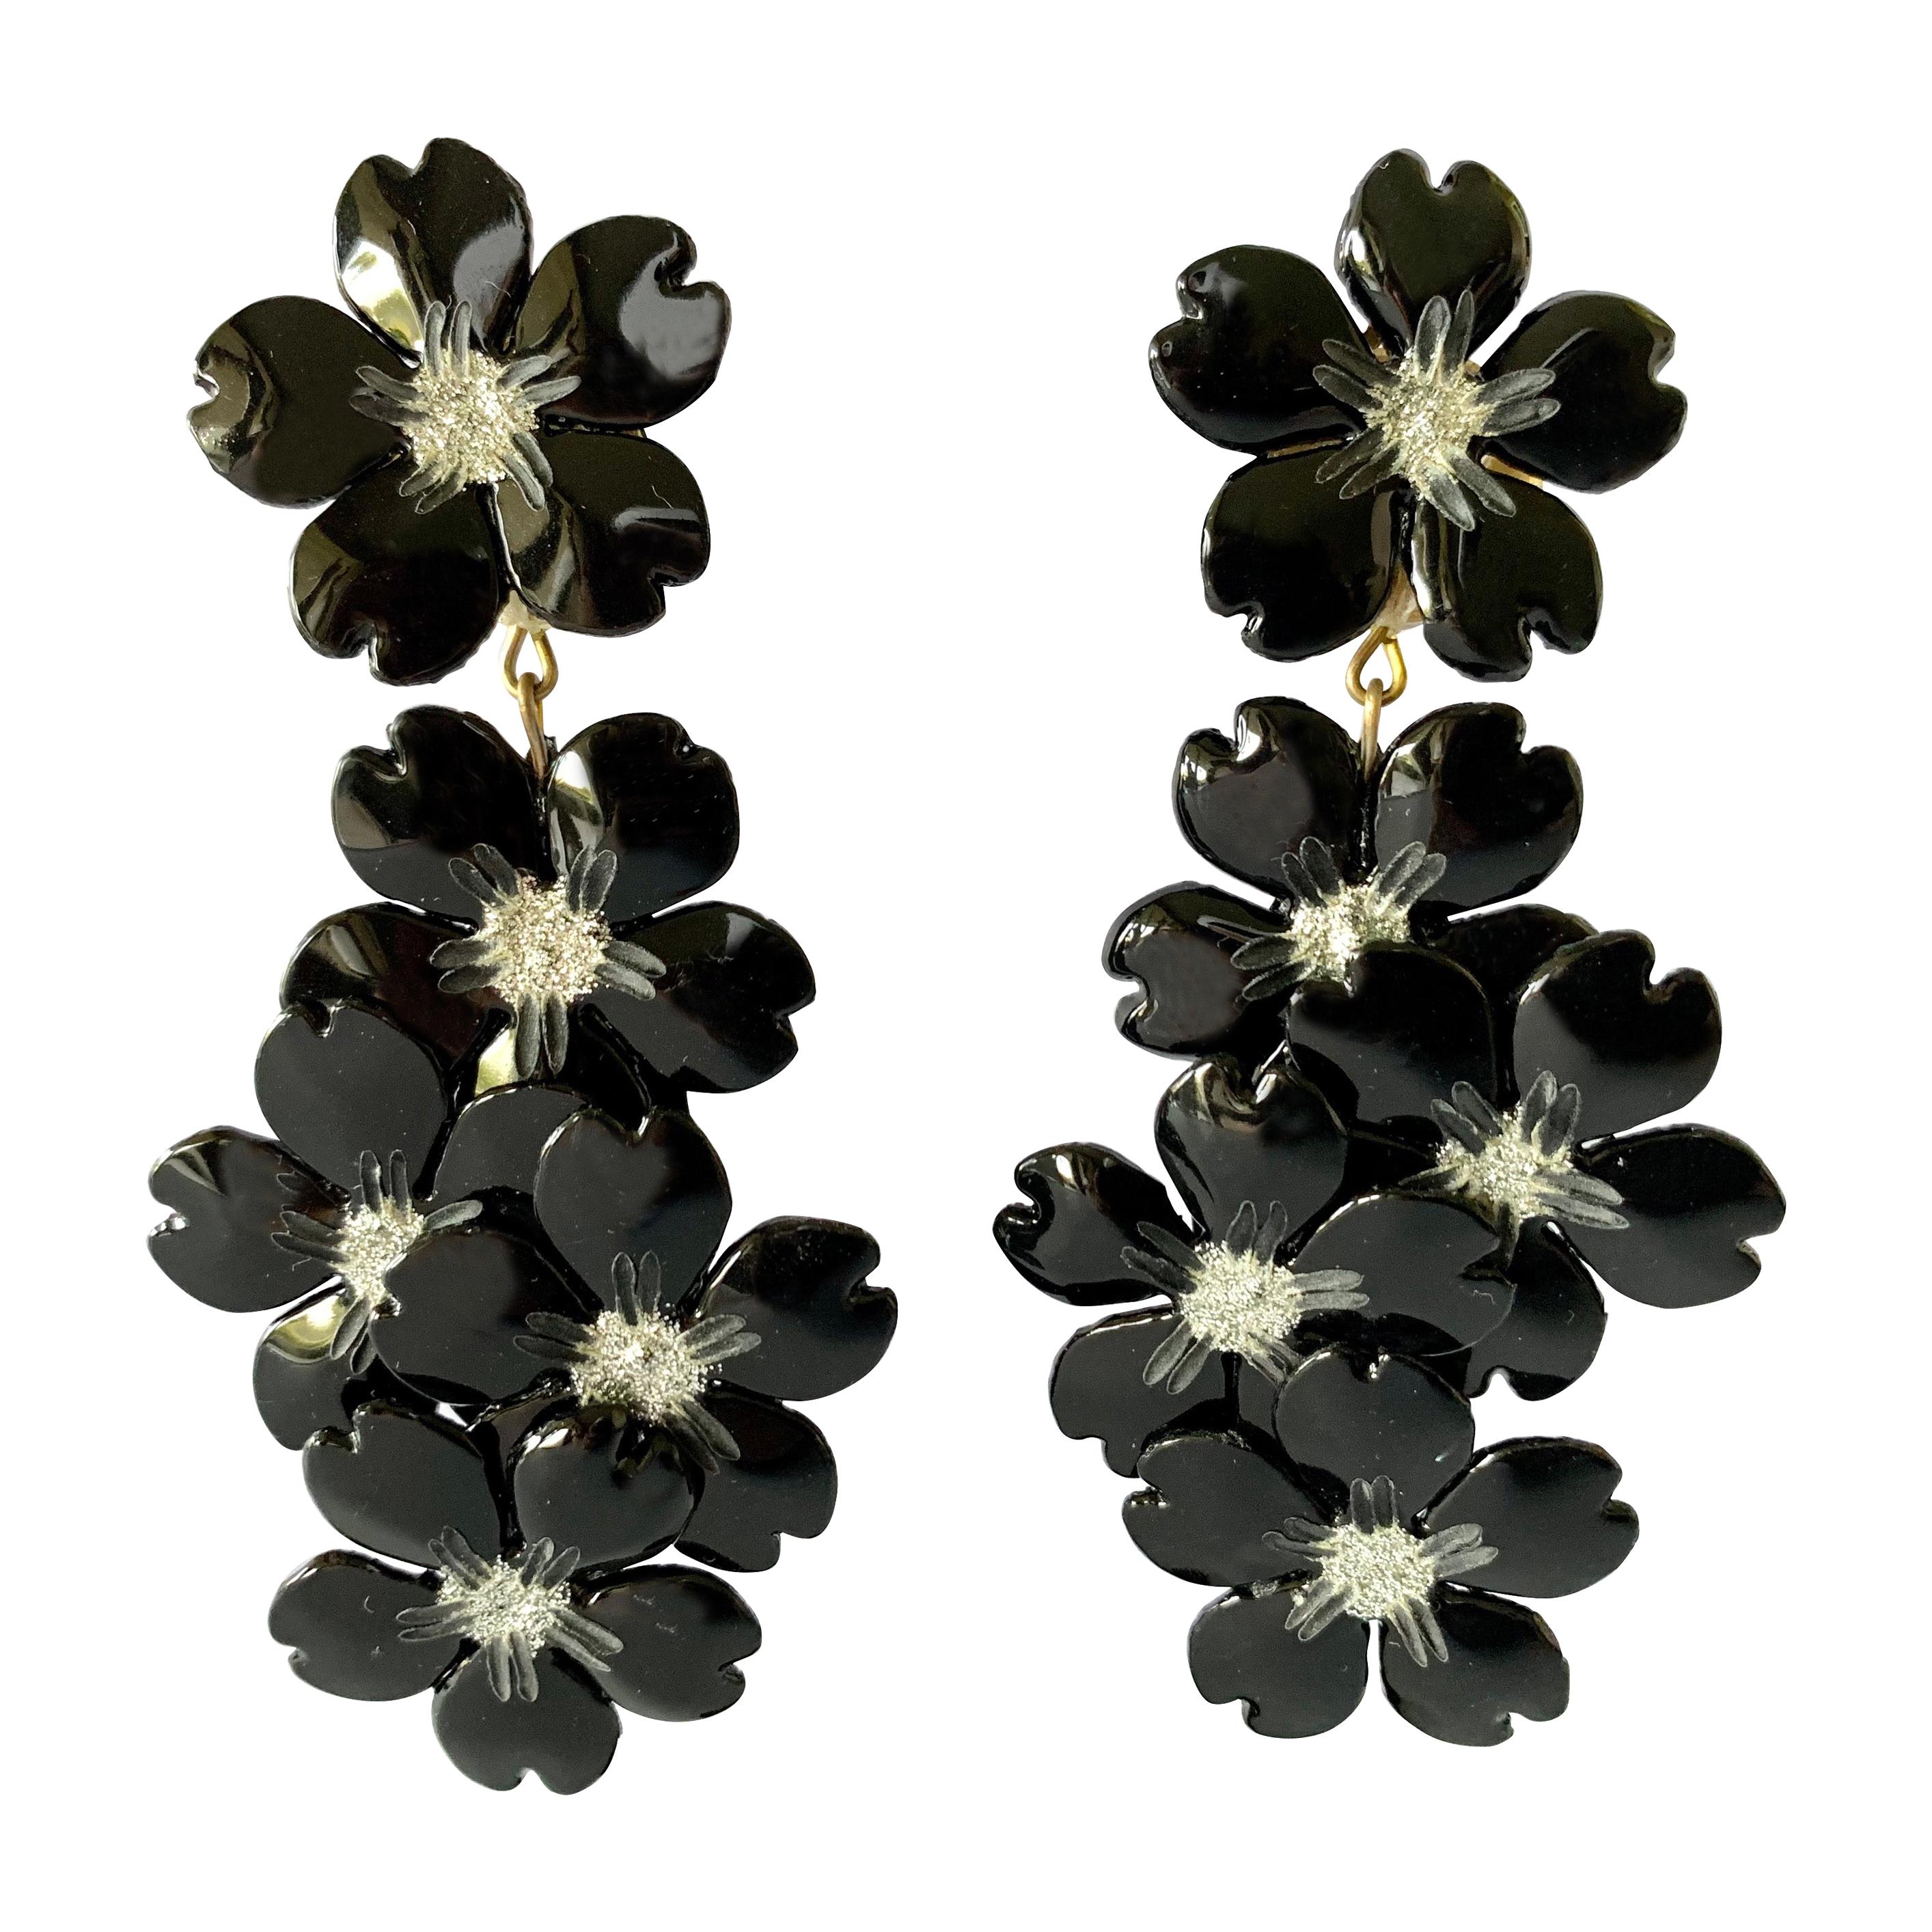 Contemporary Black and Silver Flower Chandelier Statement Earrings